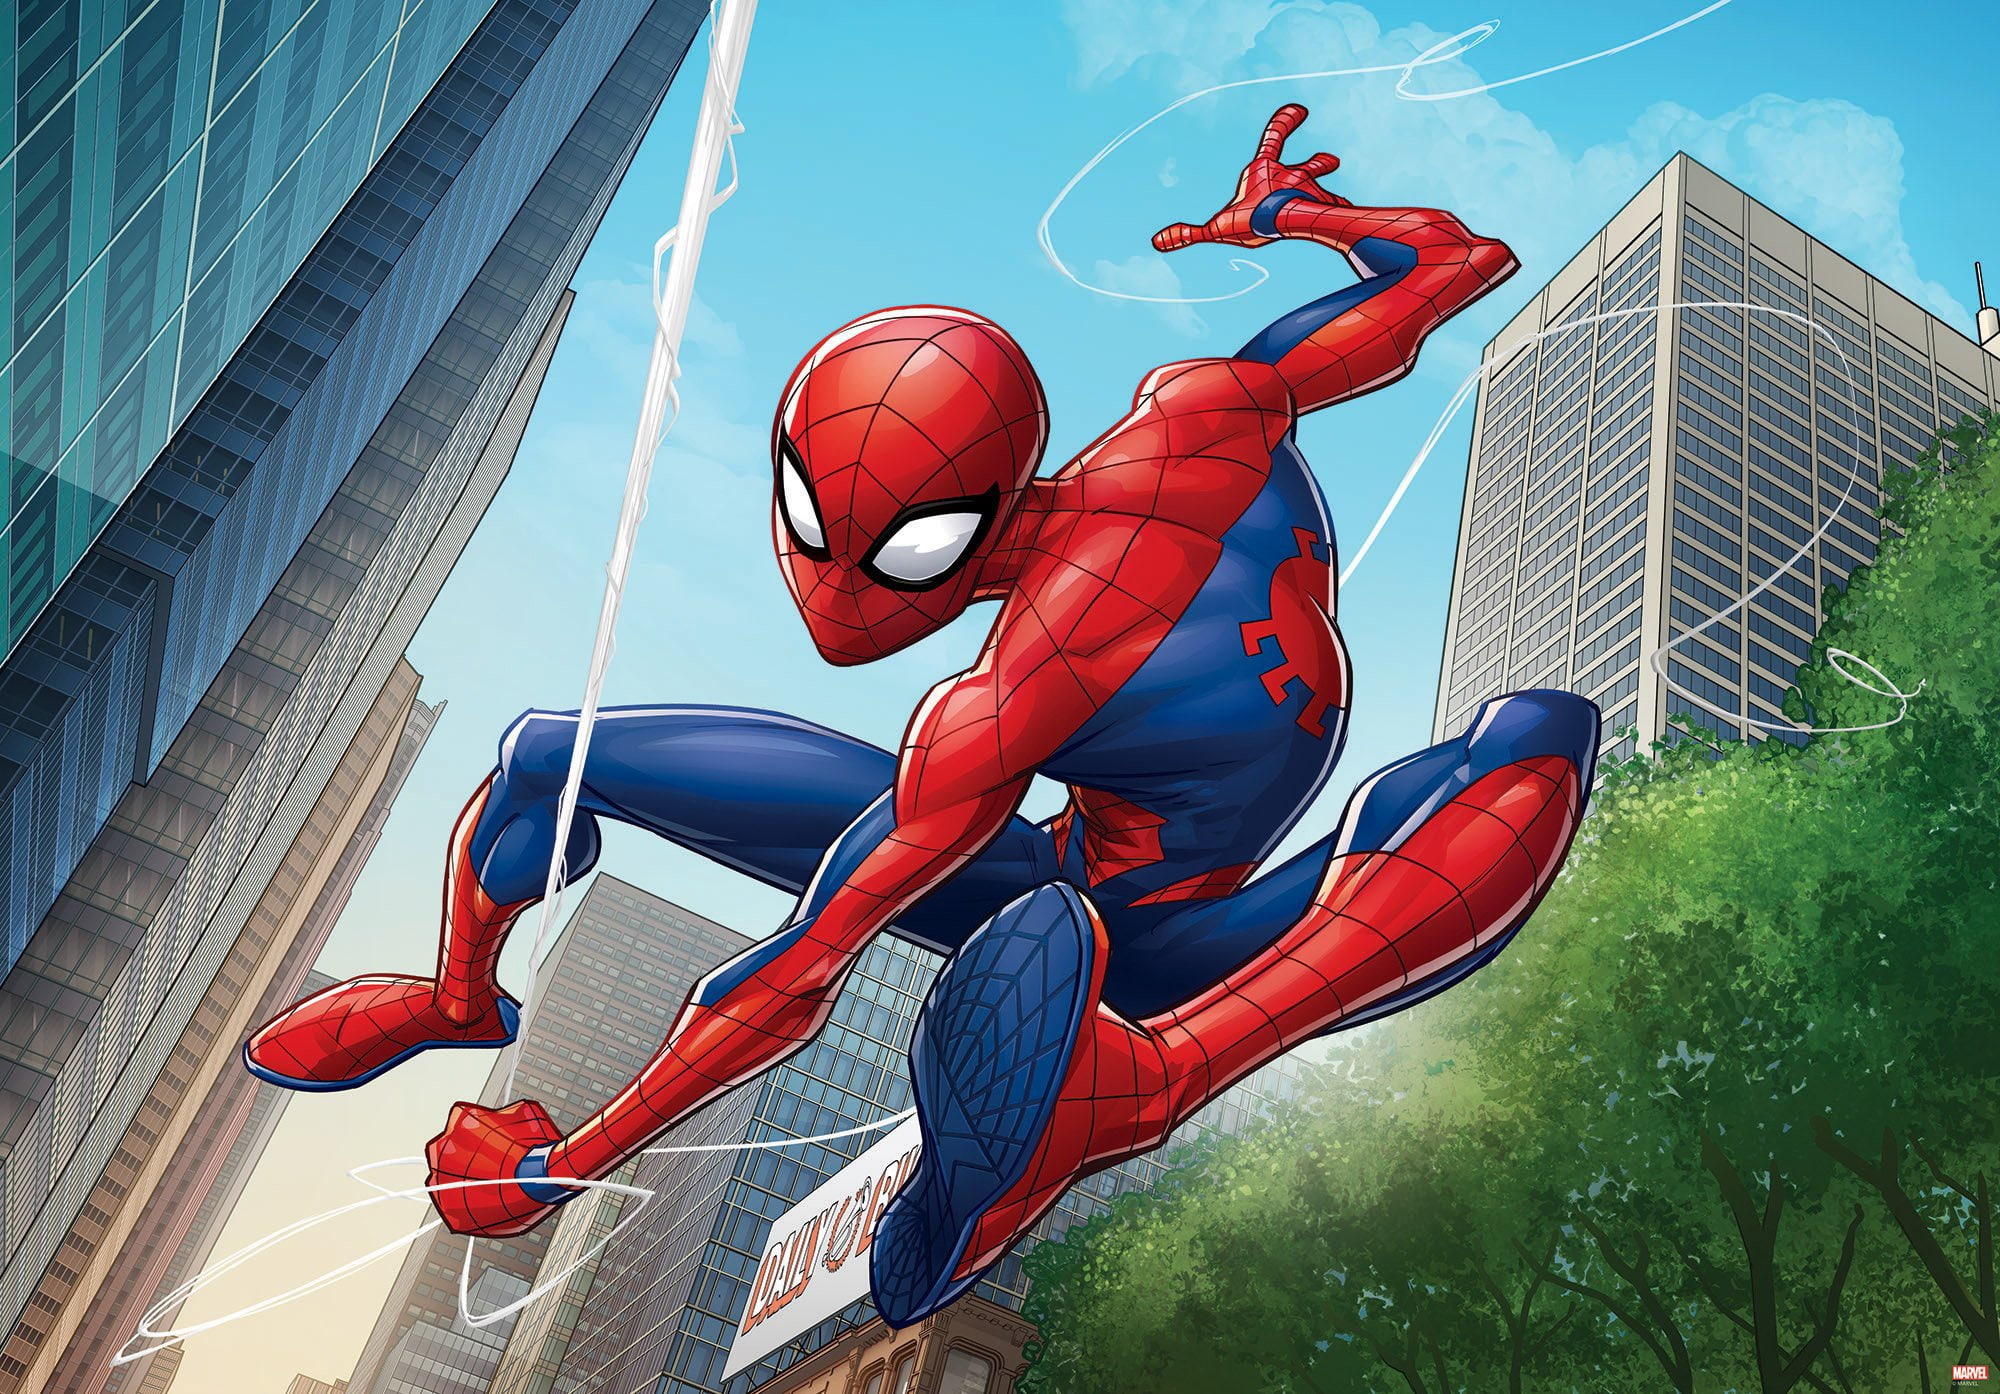 Marvel's Spider-Man HD Wallpaper by Patrick Brown